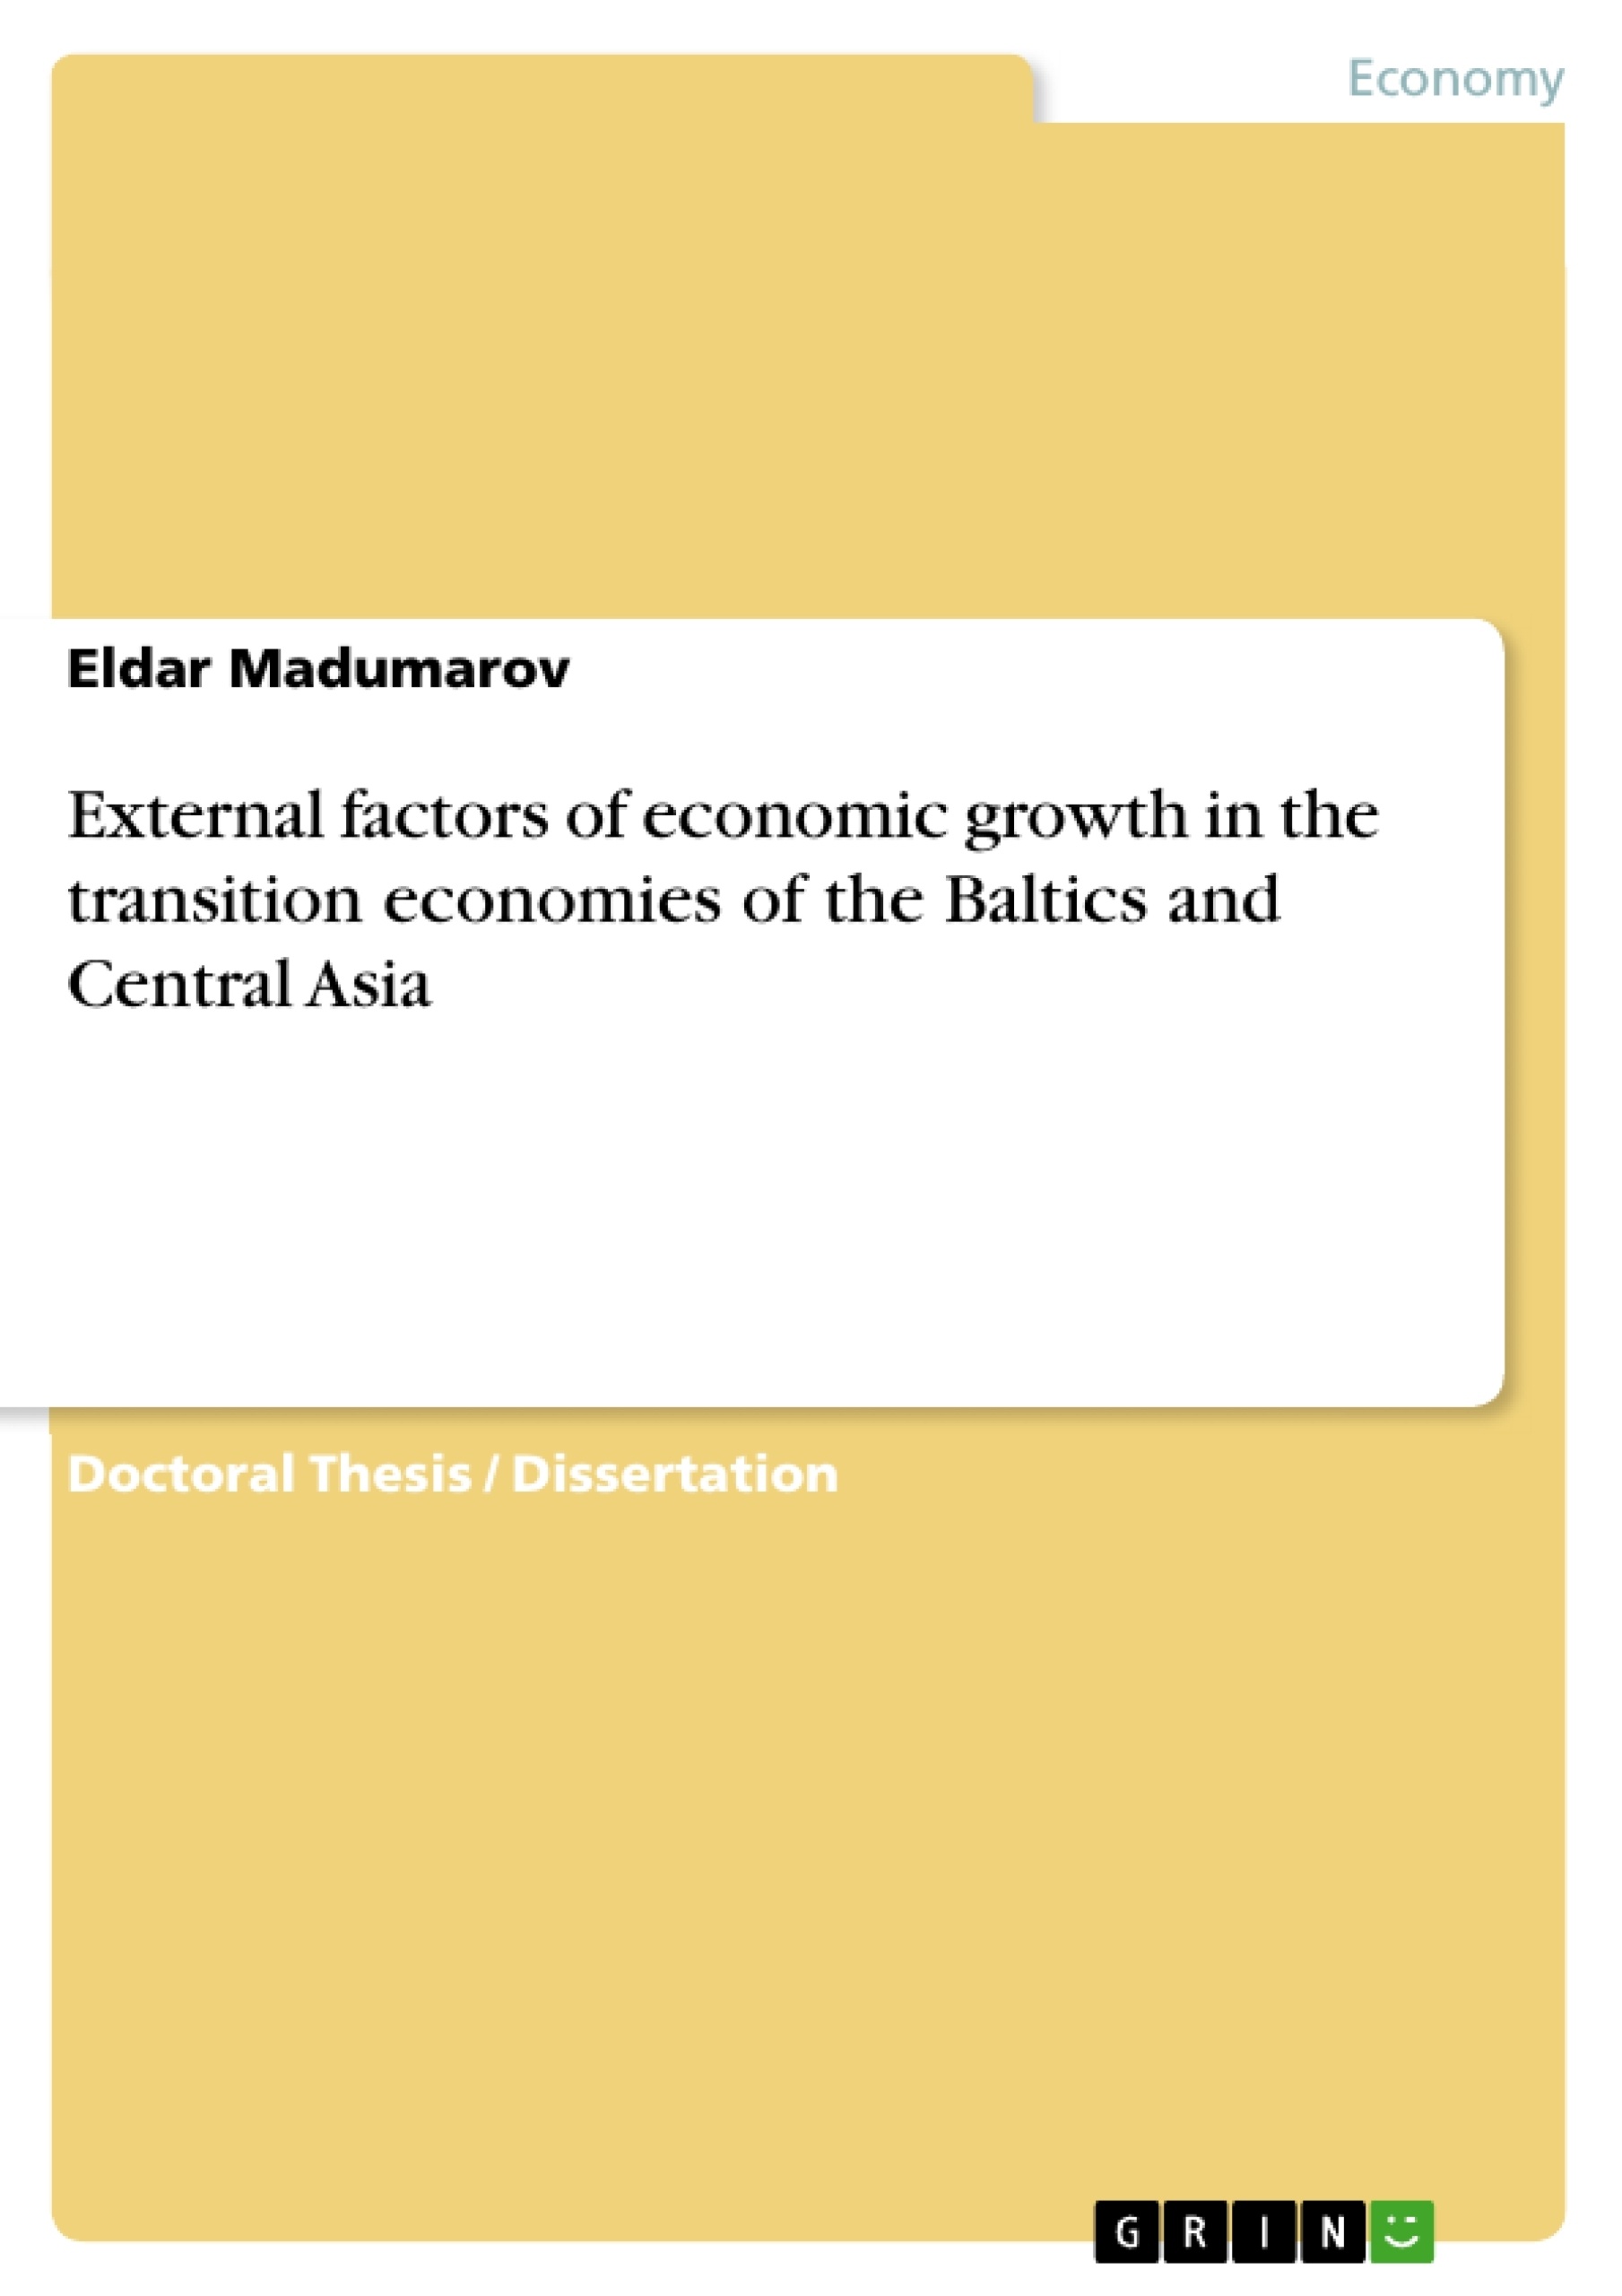 Titel: External factors of economic growth in the transition economies of the Baltics and Central Asia